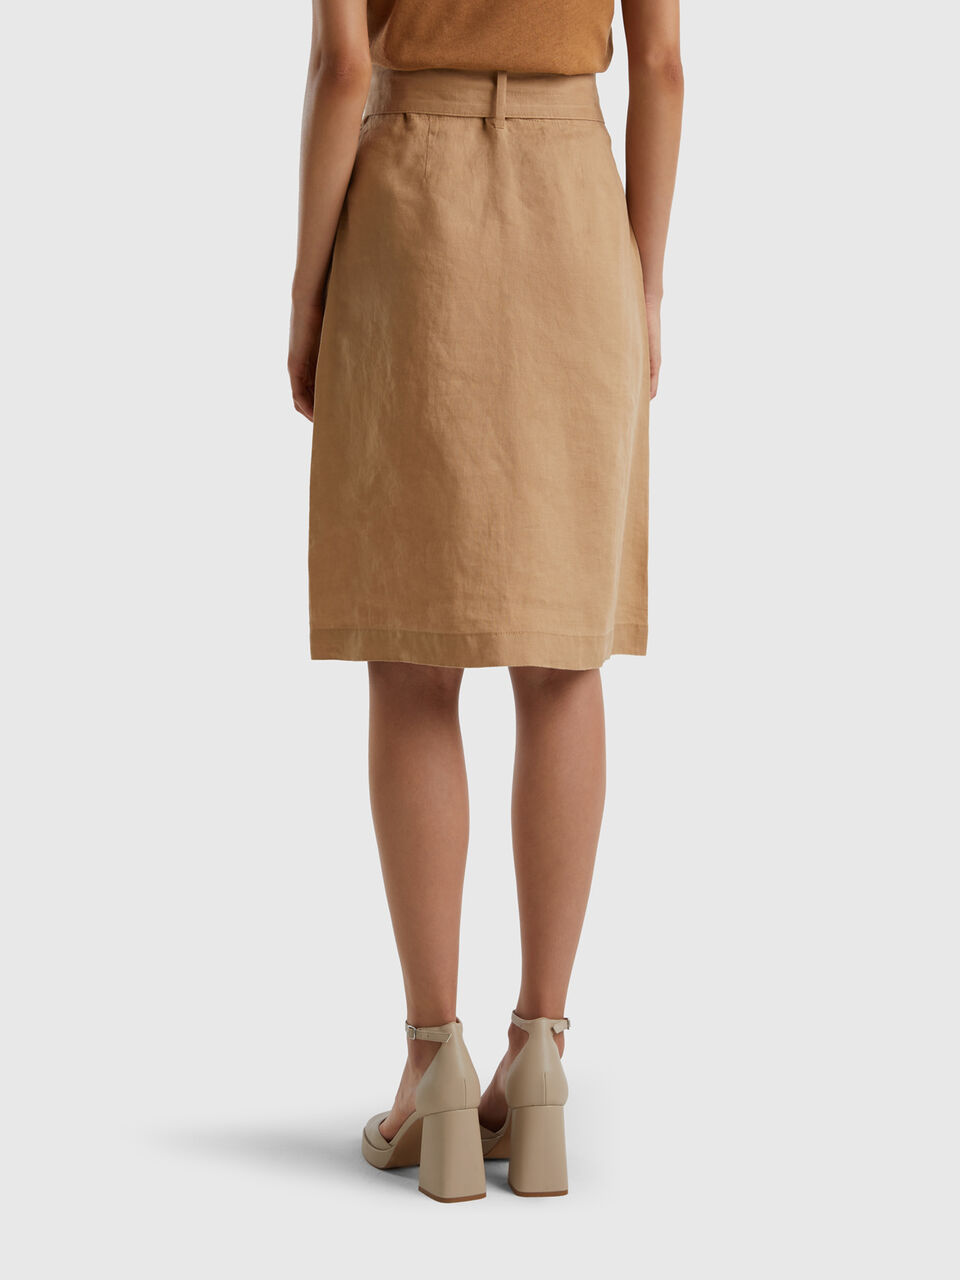 Wrap skirt in pure linen - Camel